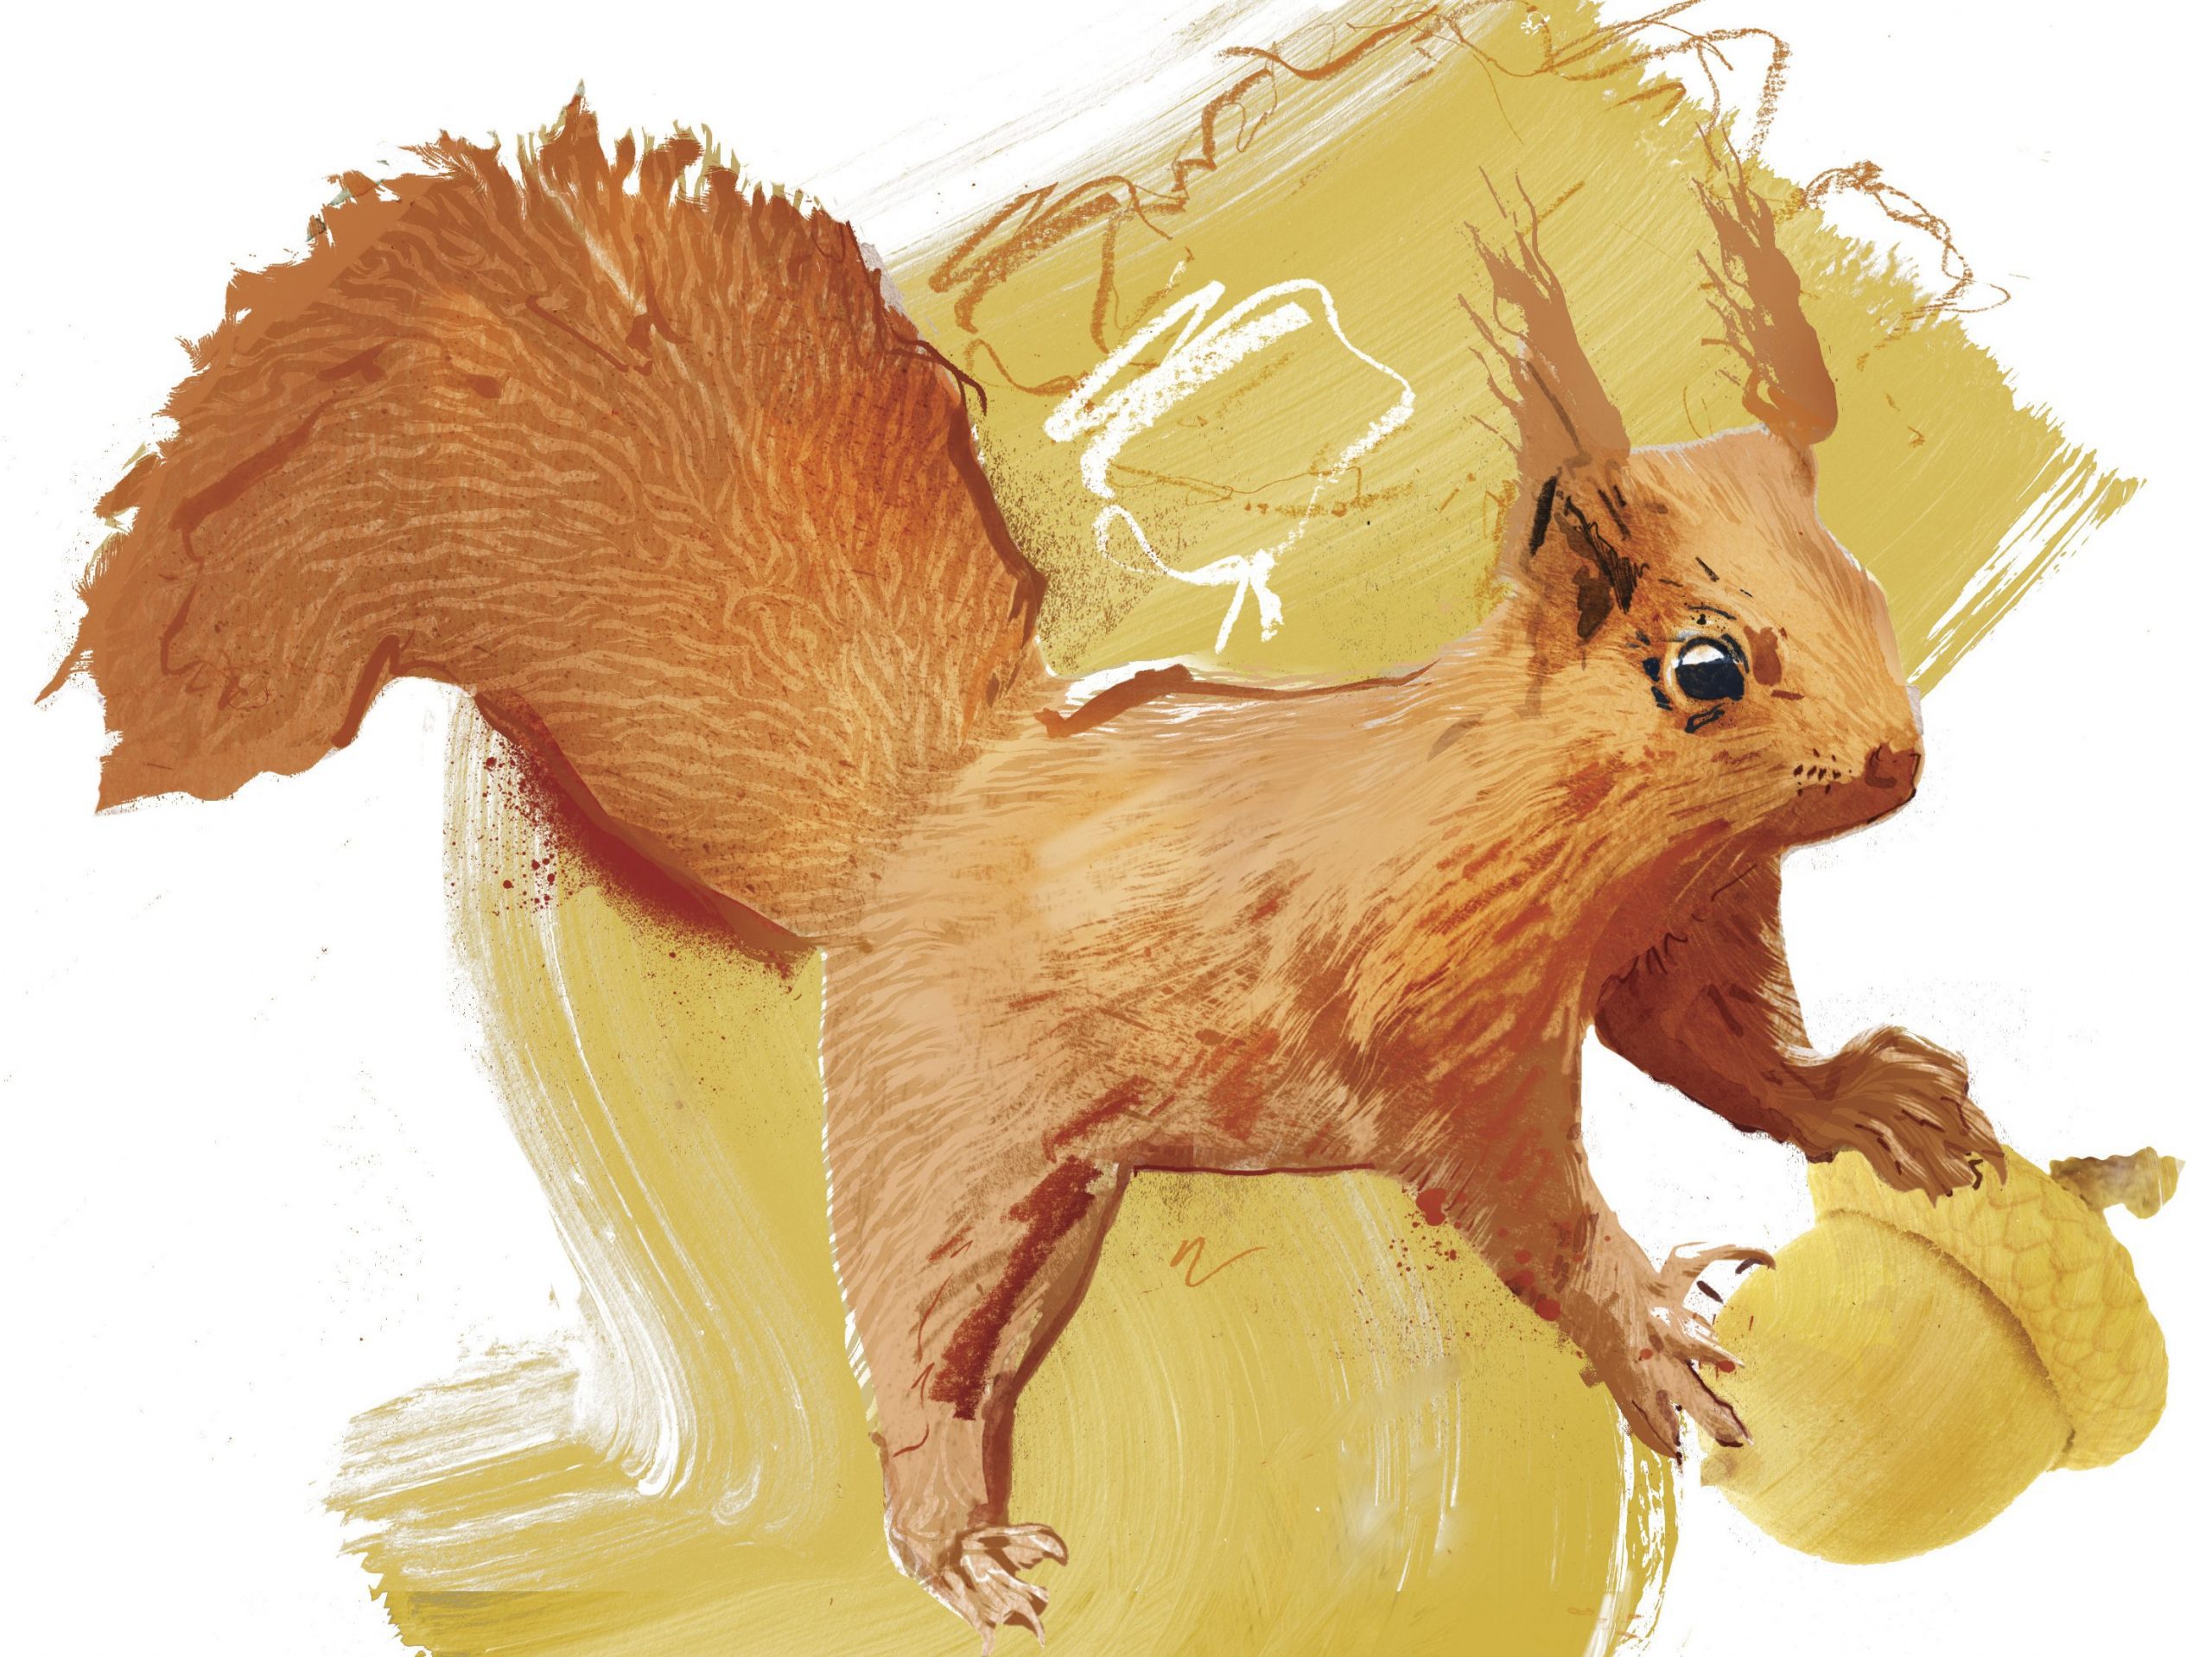 Illustration of a red squirrel